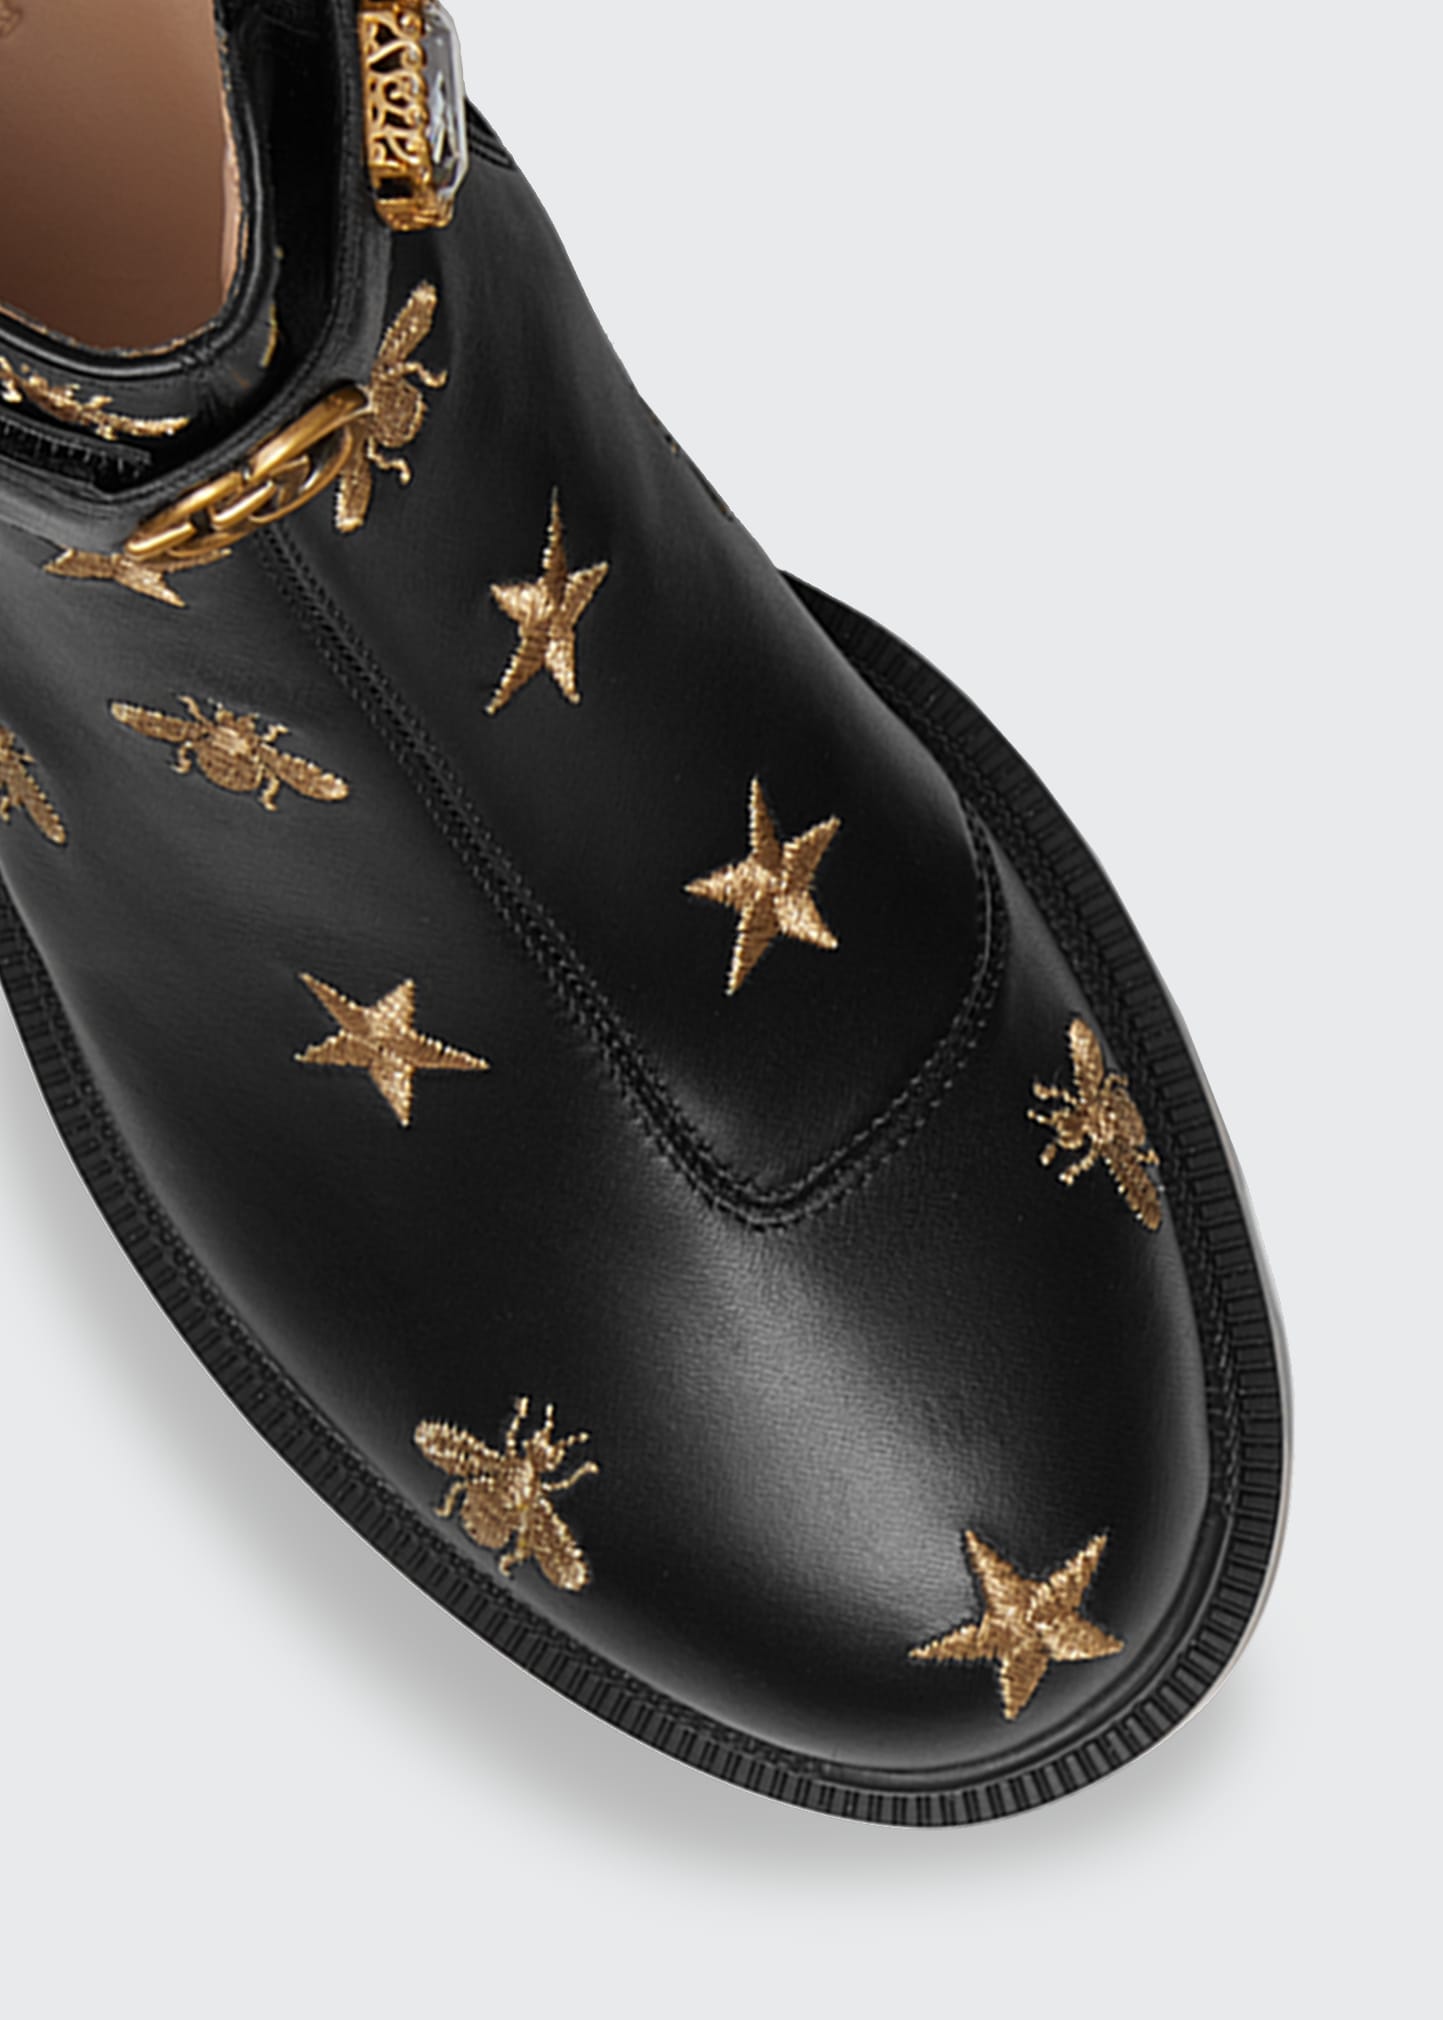 gucci star and bee boots